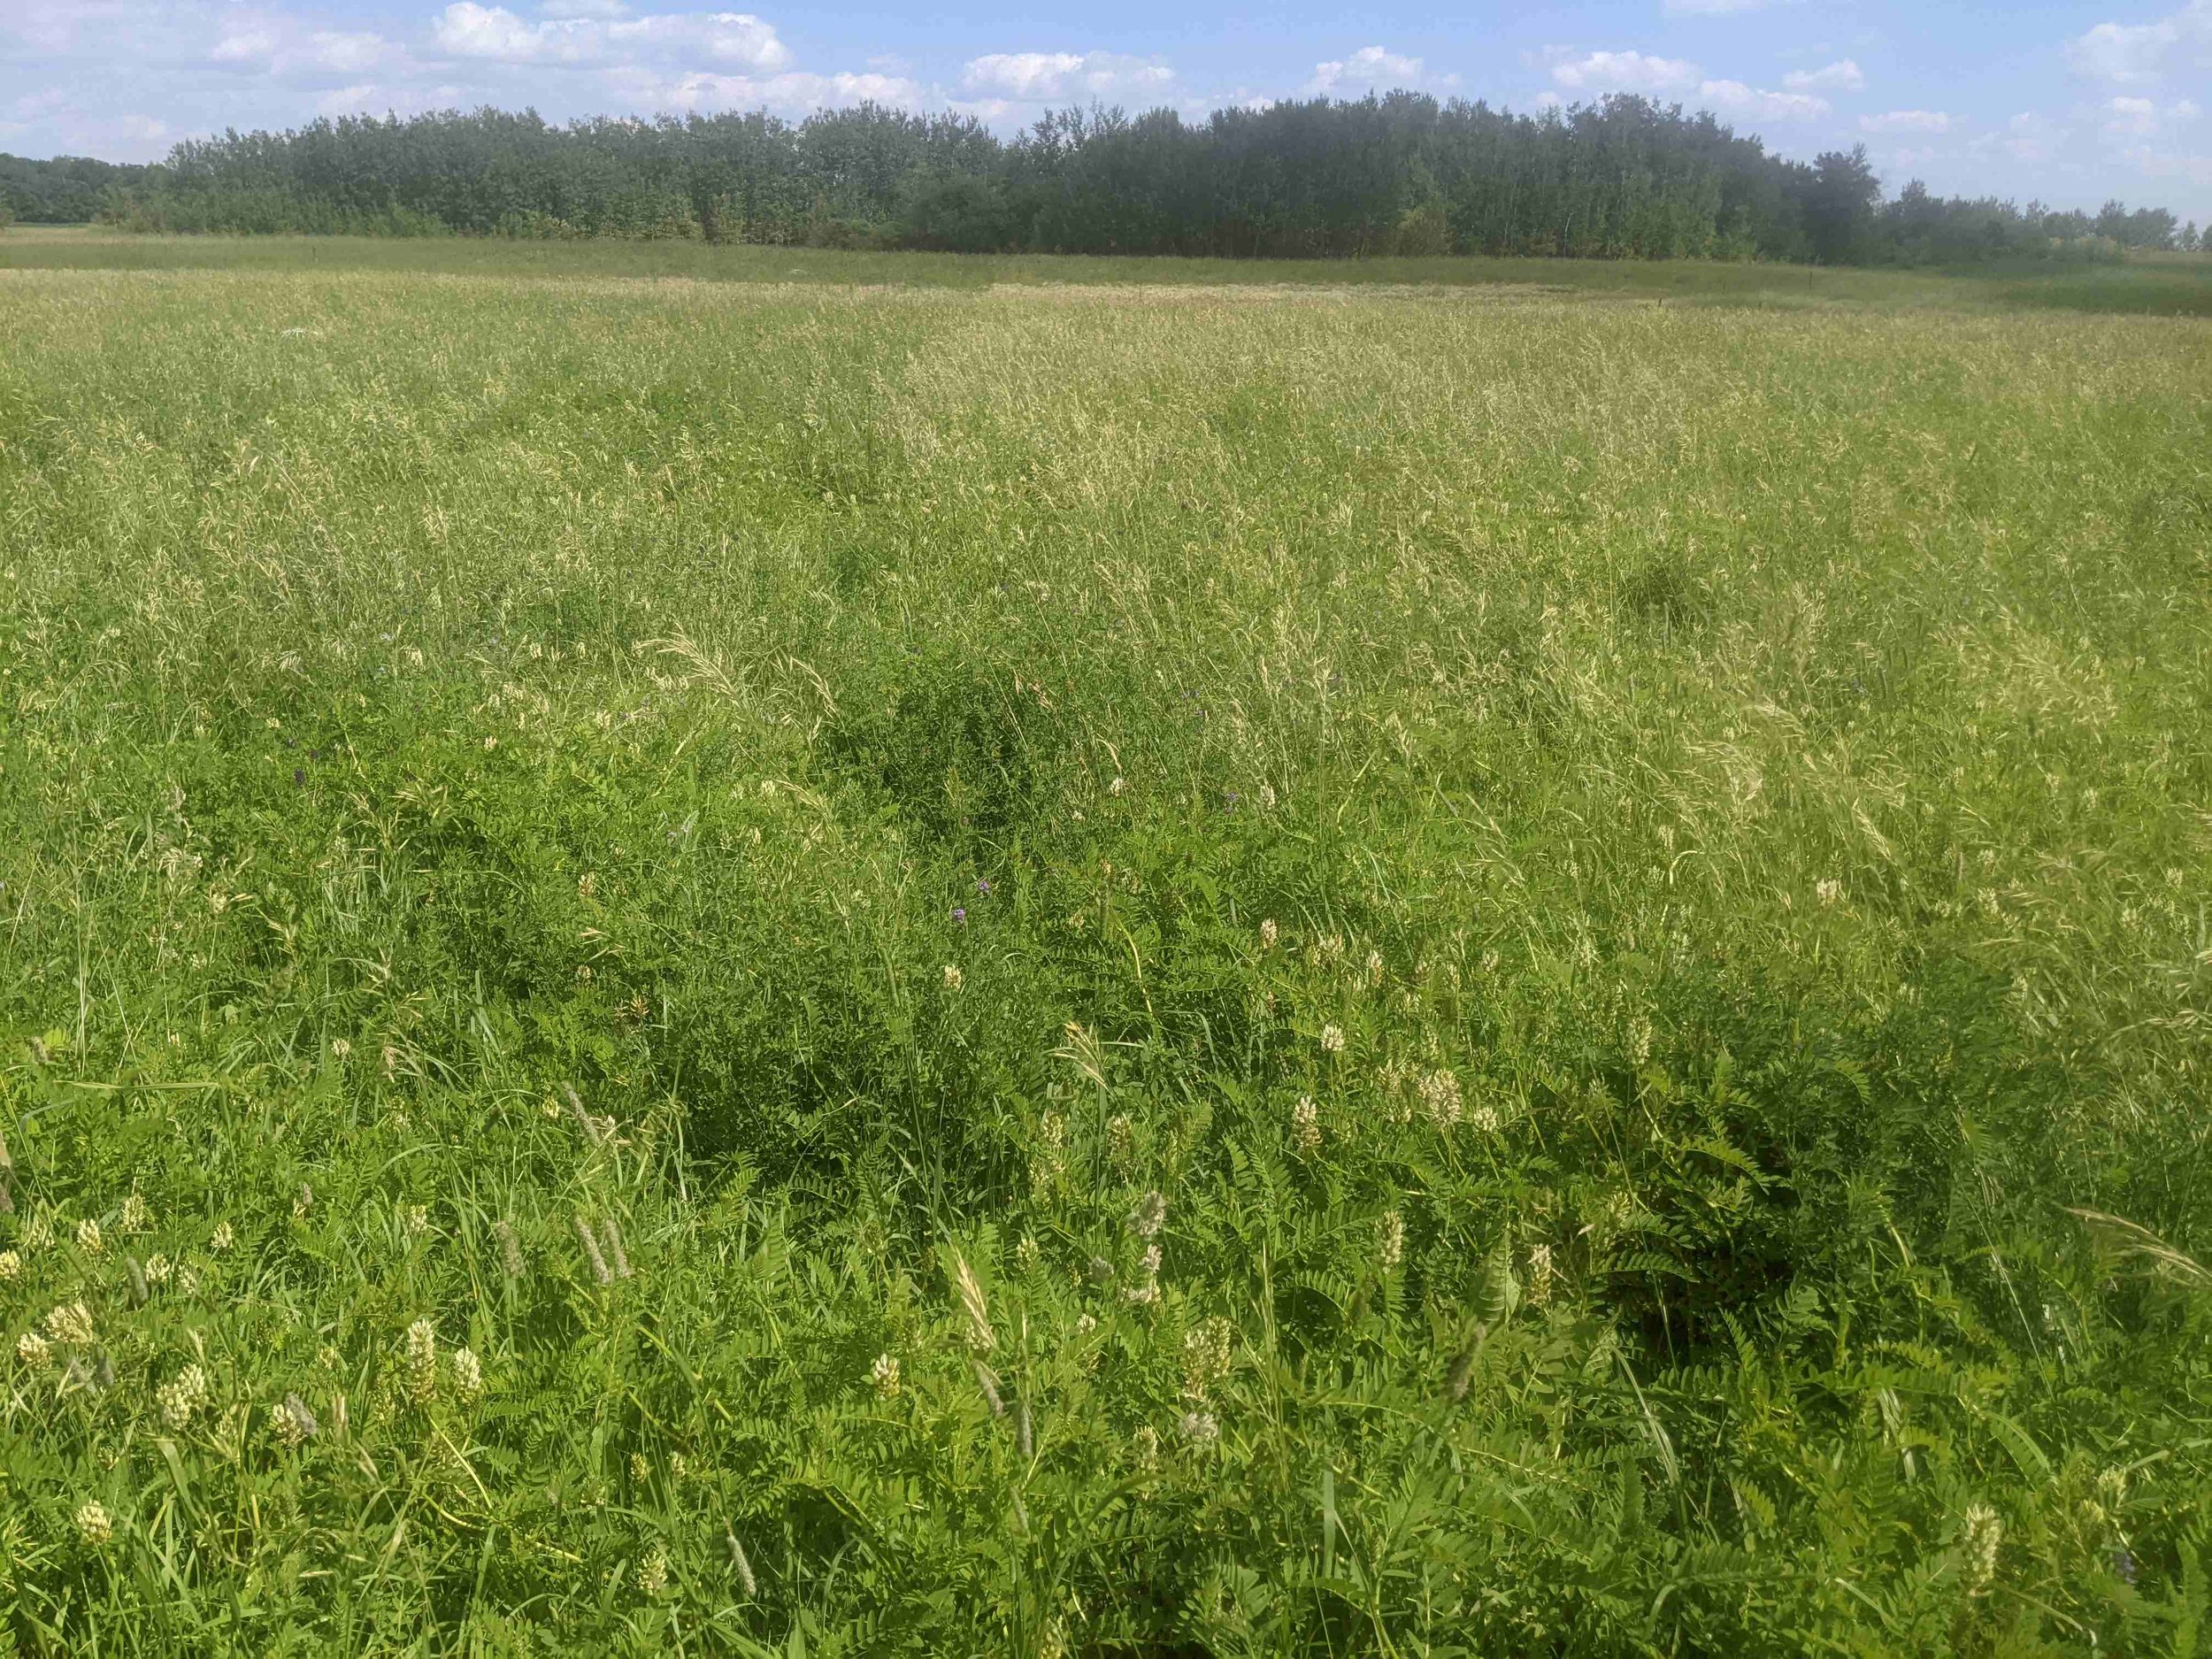 Pasture regrowth one month after grazing. Left: 80% utilization; Right: 50% utilization